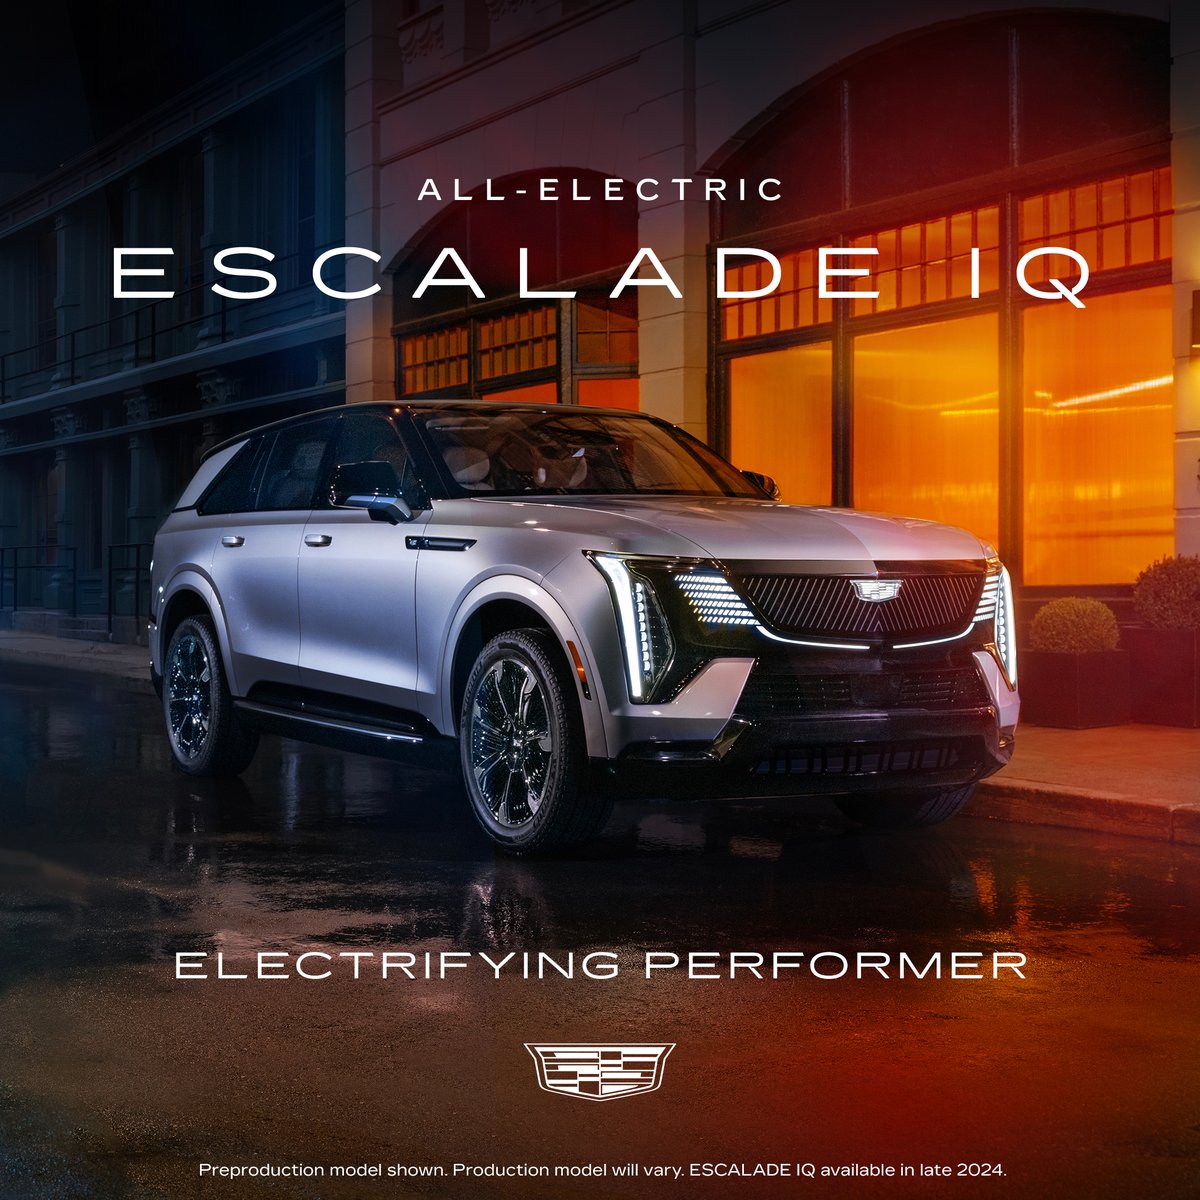 Cadillac proudly presents ESCALADE IQ, the Official Vehicle of the Producers Guild Awards. Completely reimagined as an EV, the 2025 ESCALADE IQ steals the scene with its bold presence. #Cadillac #ESCALADEIQ #BeIconic #PGAAwards @Cadillac